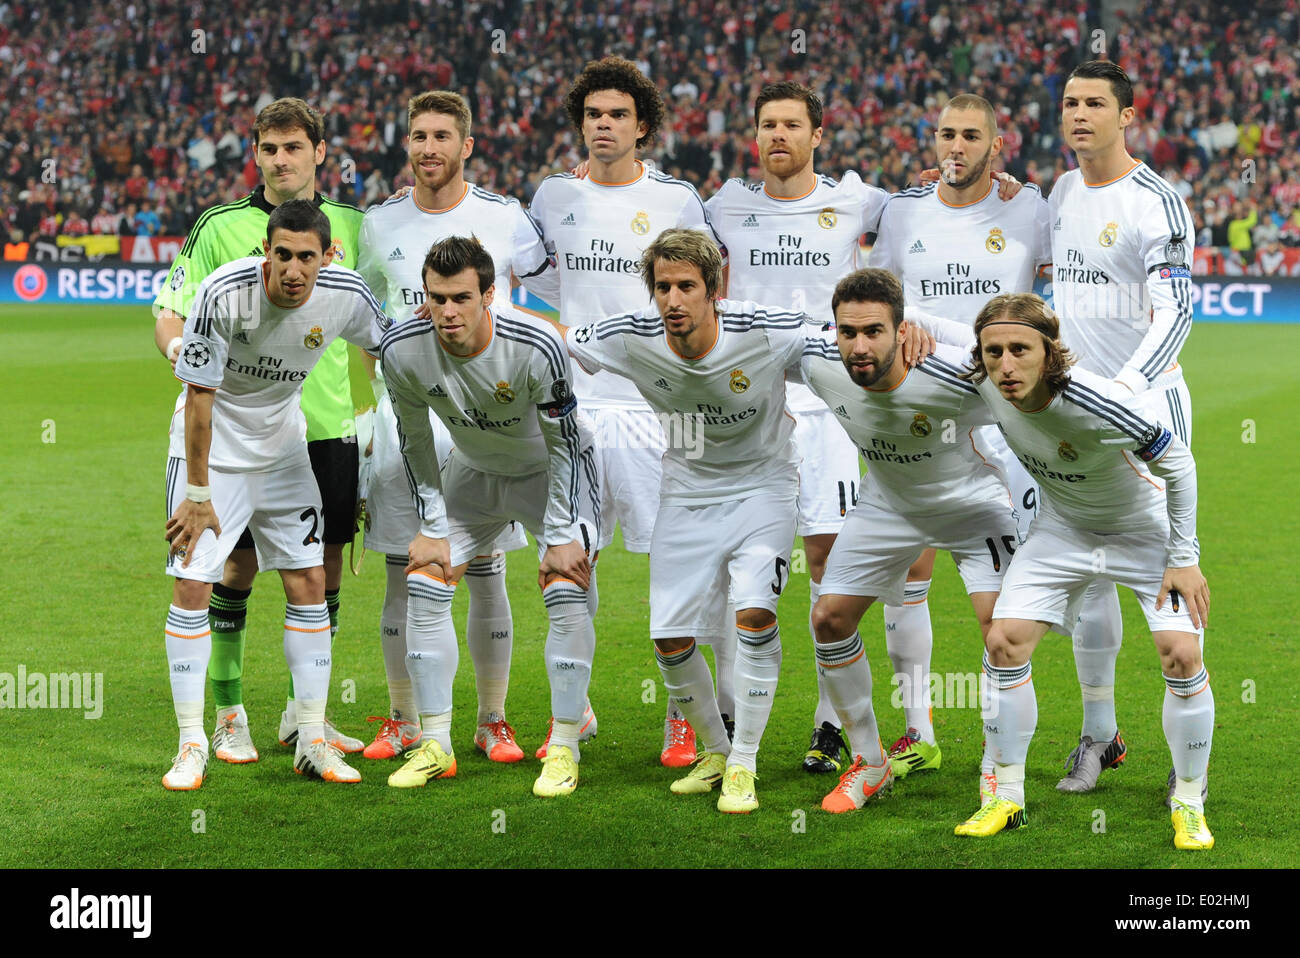 Munich, Germany. 29th Mar, 2014. Madrid's first eleven: (back, L-R) goalkeeper Iker Casillas, Sergio Ramos, Pepe, Xabi Alonso, Karim Benzema, Cristiano Ronaldo and (front, L-R), Angel di Maria, Gareth Bale, Fabio Coentrao, Daniel Carvajal and Luka Modric during the Champions League semi-final second leg match between FC Bayern Munich and Real Madrid at Arena in Munich, Germany, 29 March 2014. Photo: Andreas Gebert/dpa/Alamy Live News Stock Photo